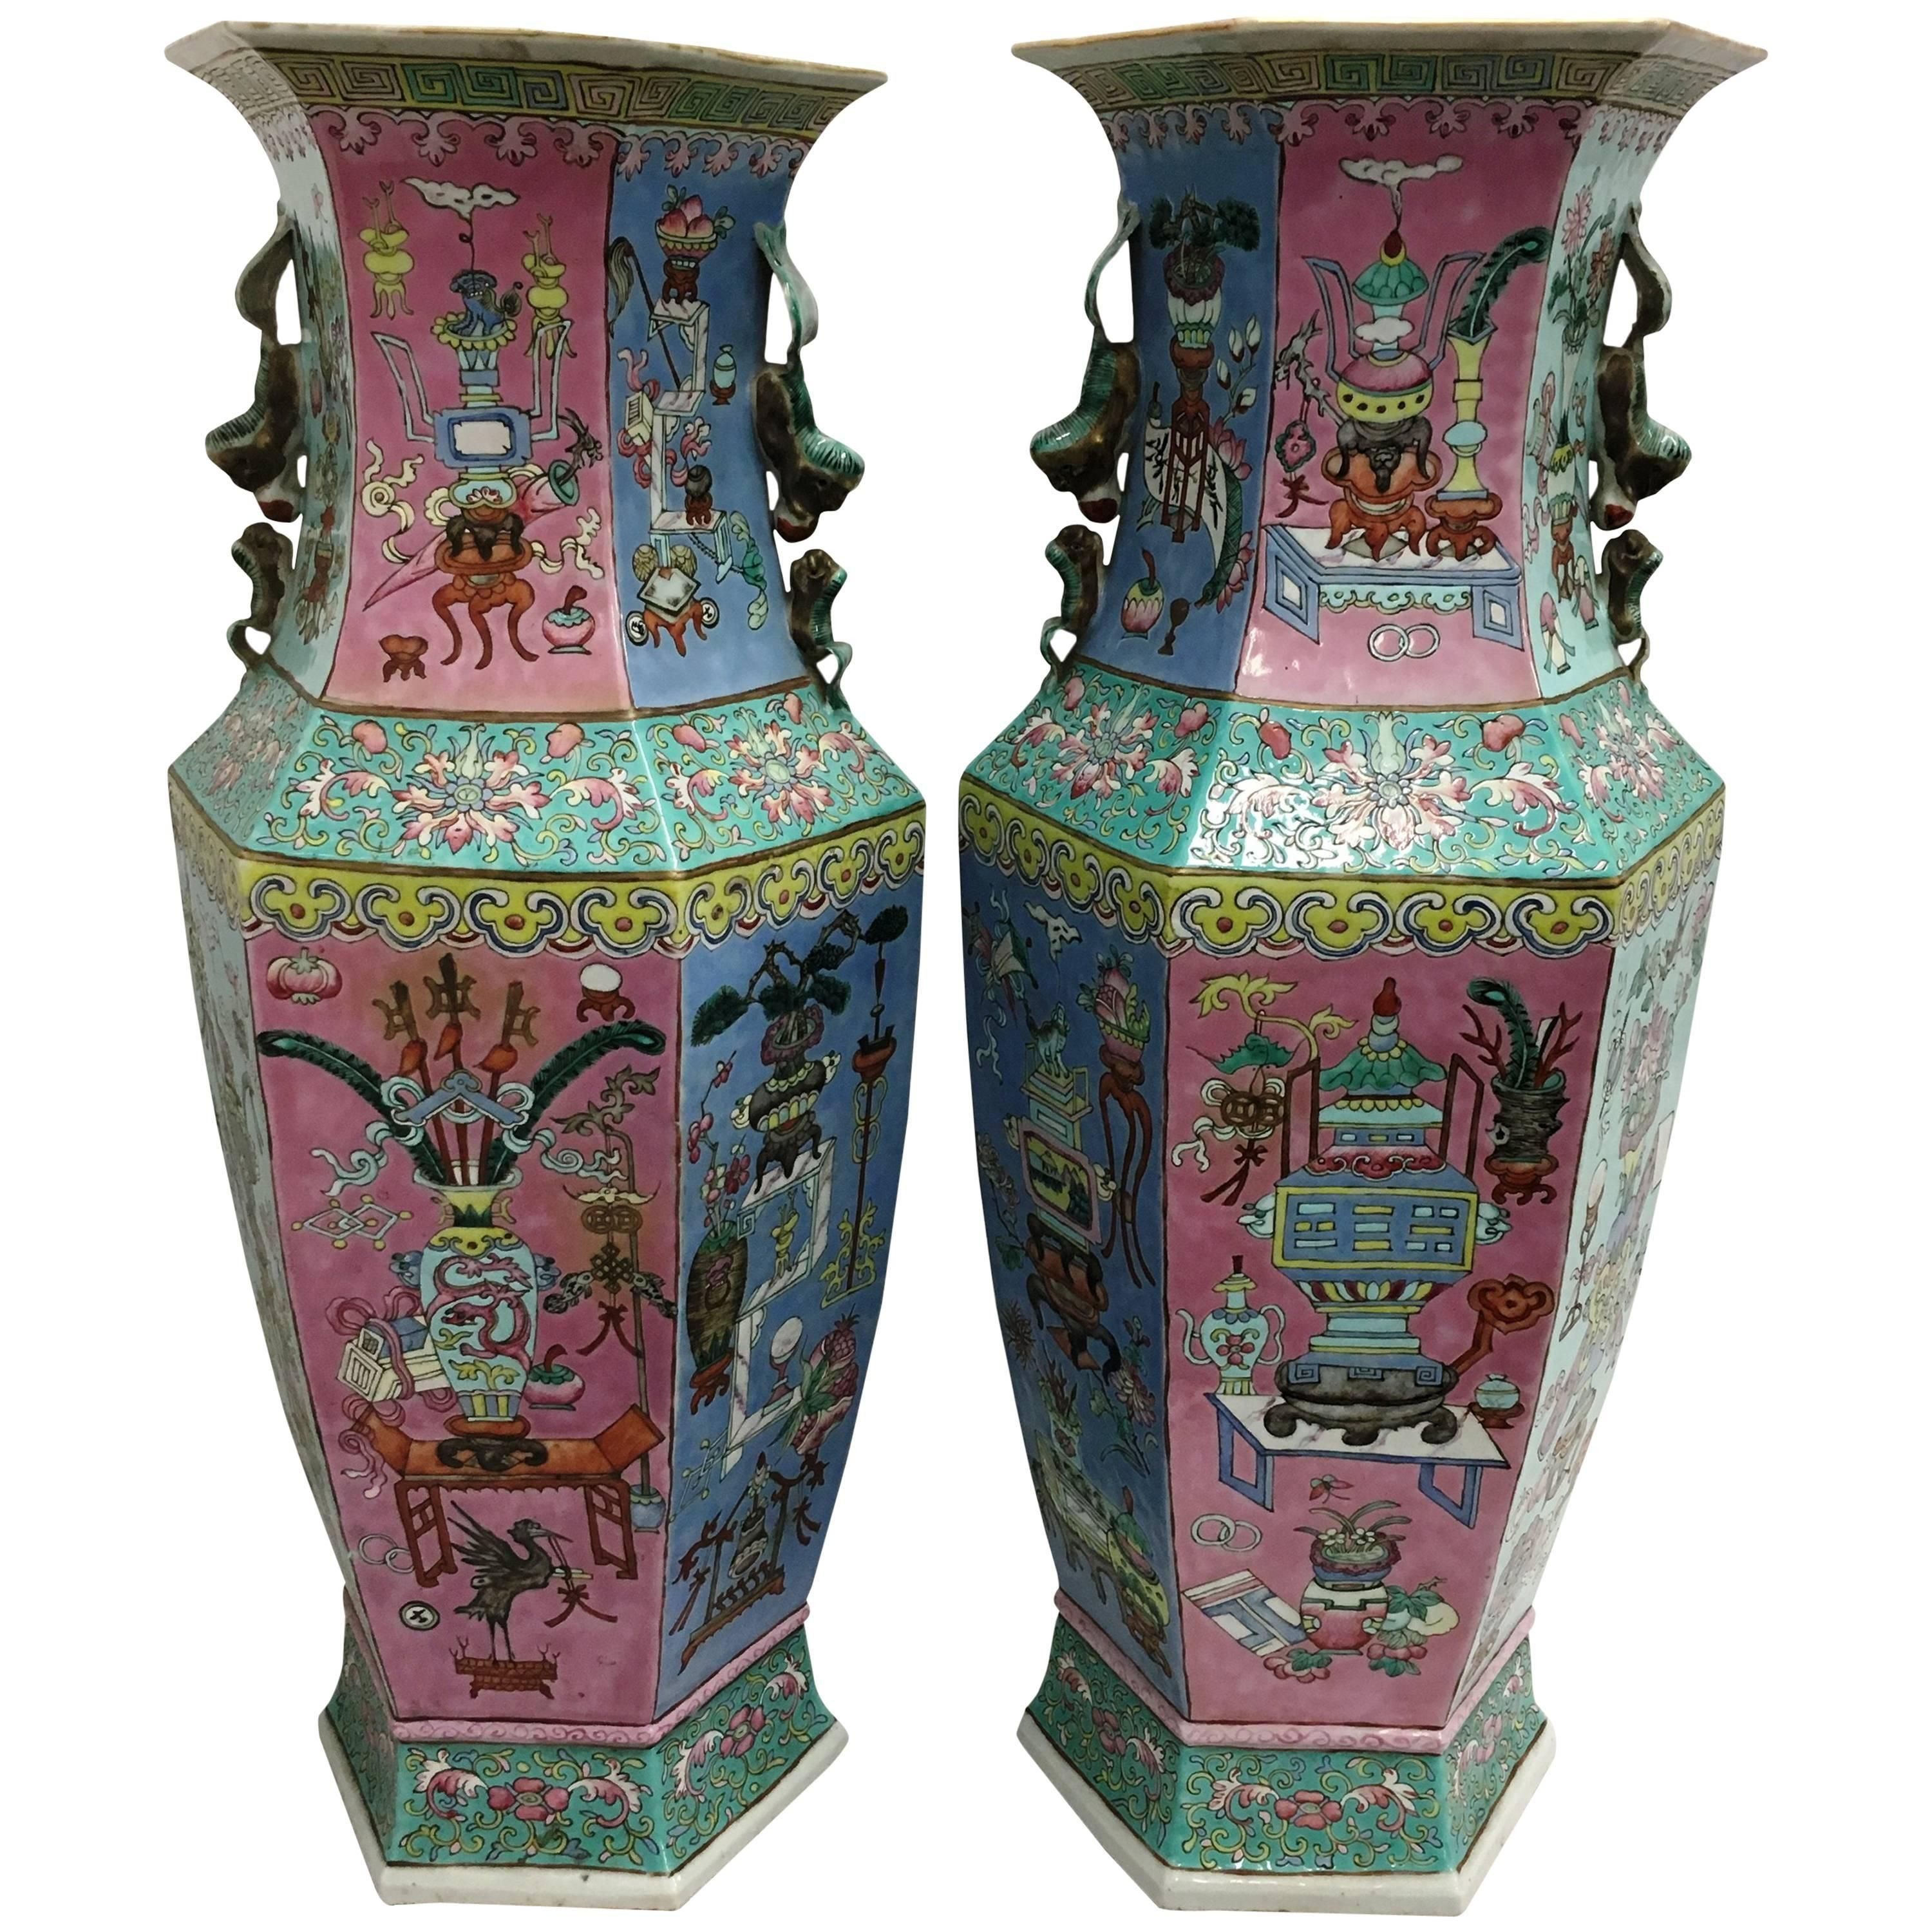 20 attractive Tall Blue Ceramic Vase 2024 free download tall blue ceramic vase of square ceramic vase fresh chinese 19th century famille rose lidded pertaining to square ceramic vase fresh chinese 19th century famille rose lidded vase or lamp for